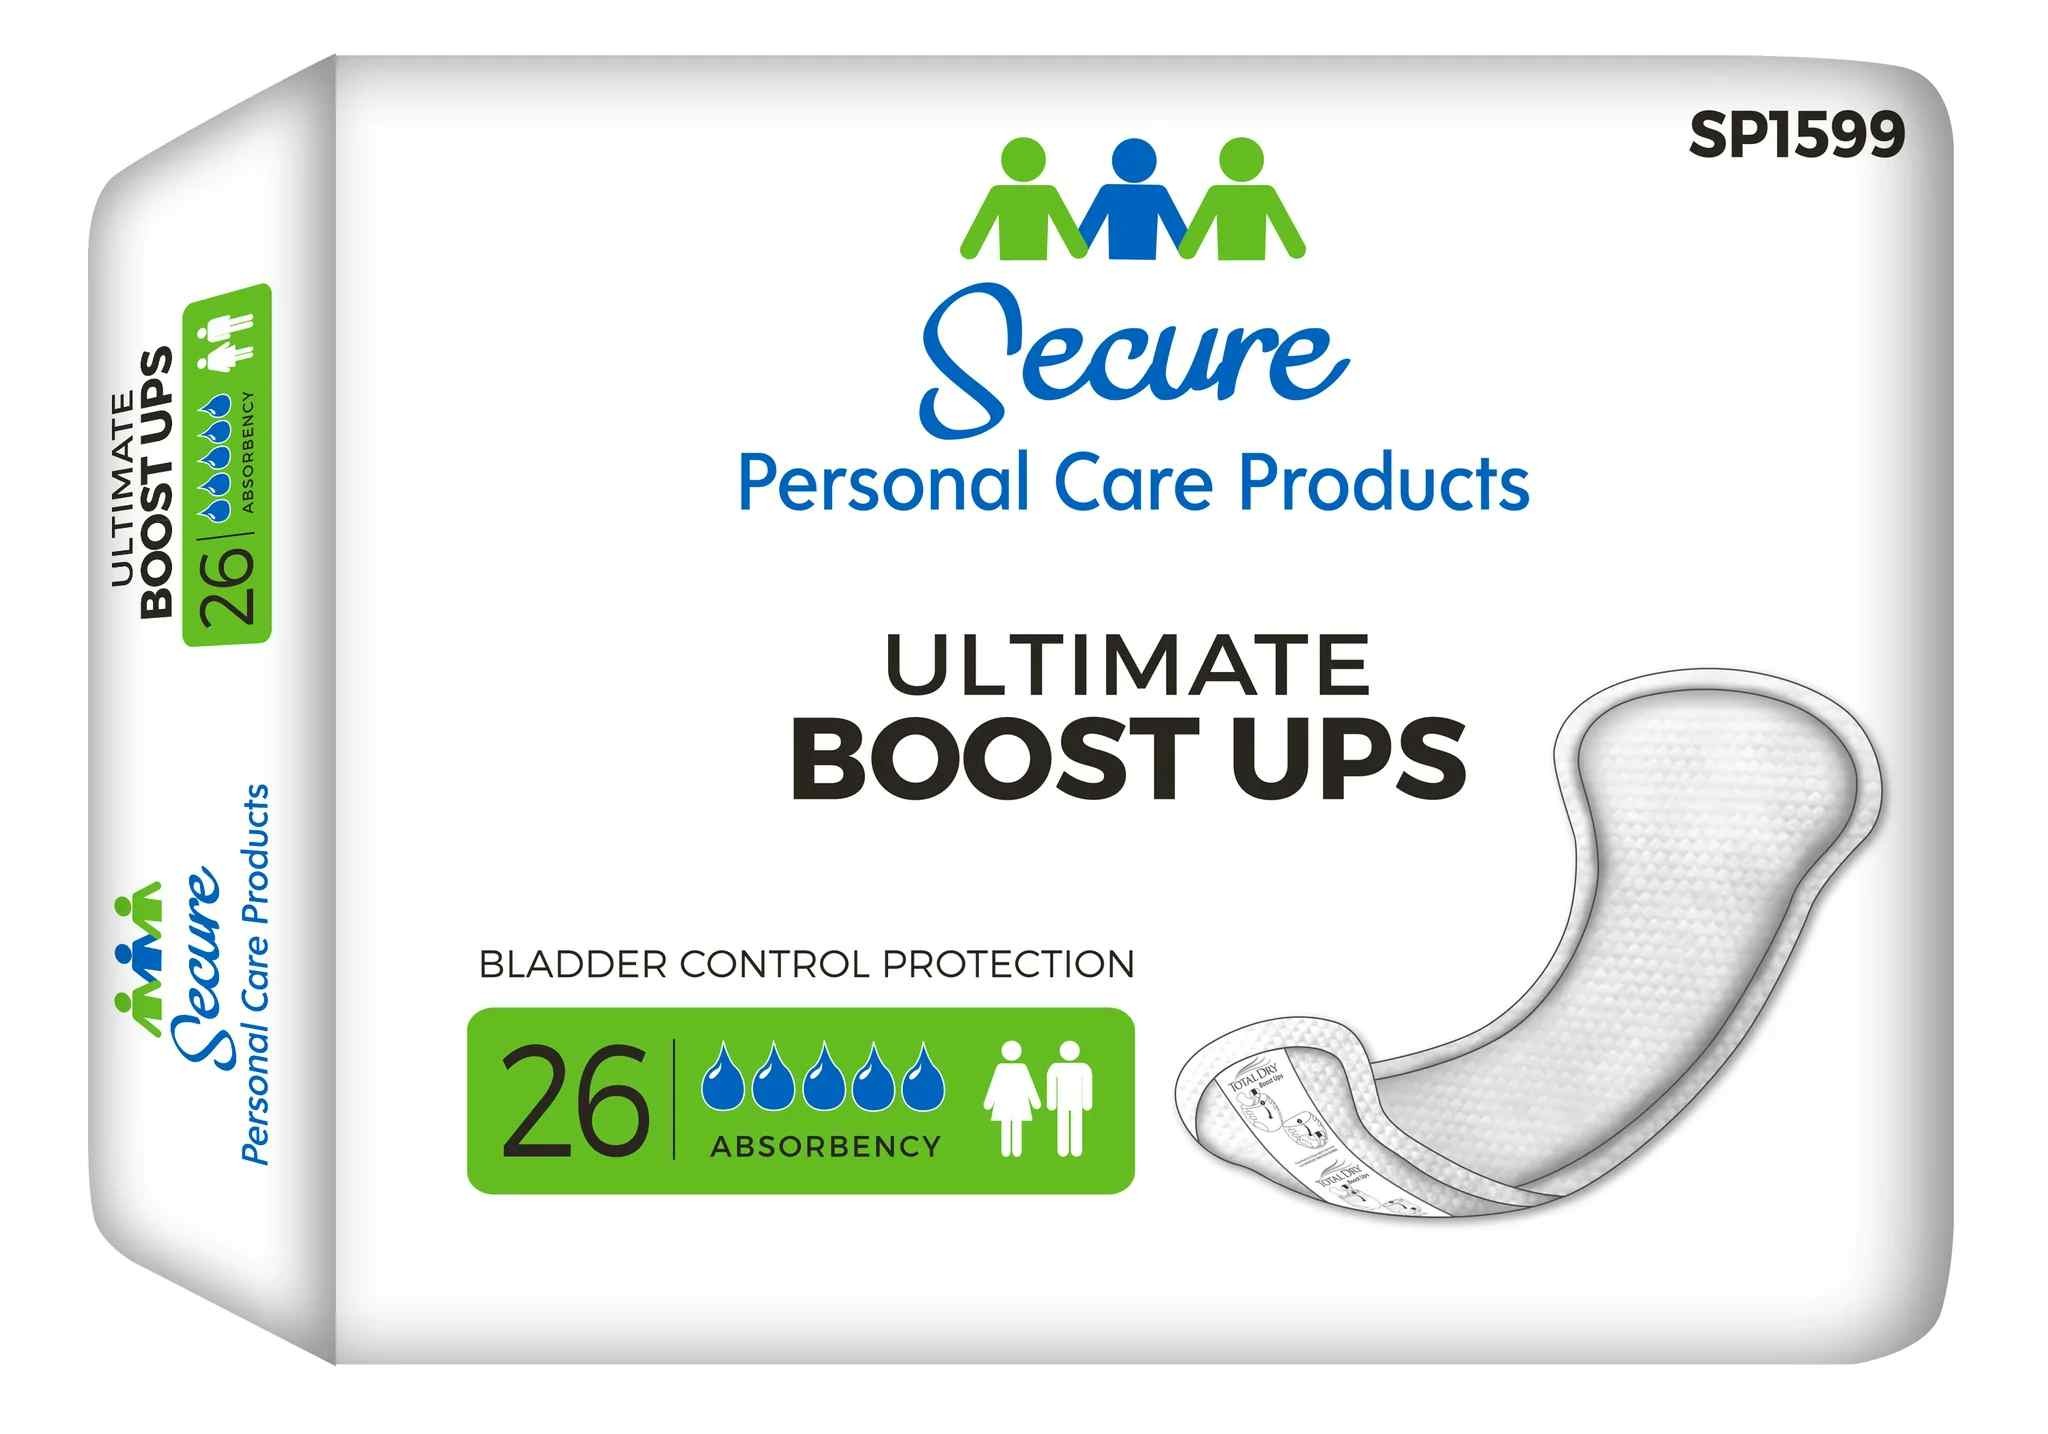 Secure Personal Care Products Ultimate Boost Ups Bladder Control Pad,SP1599, Bag of 26